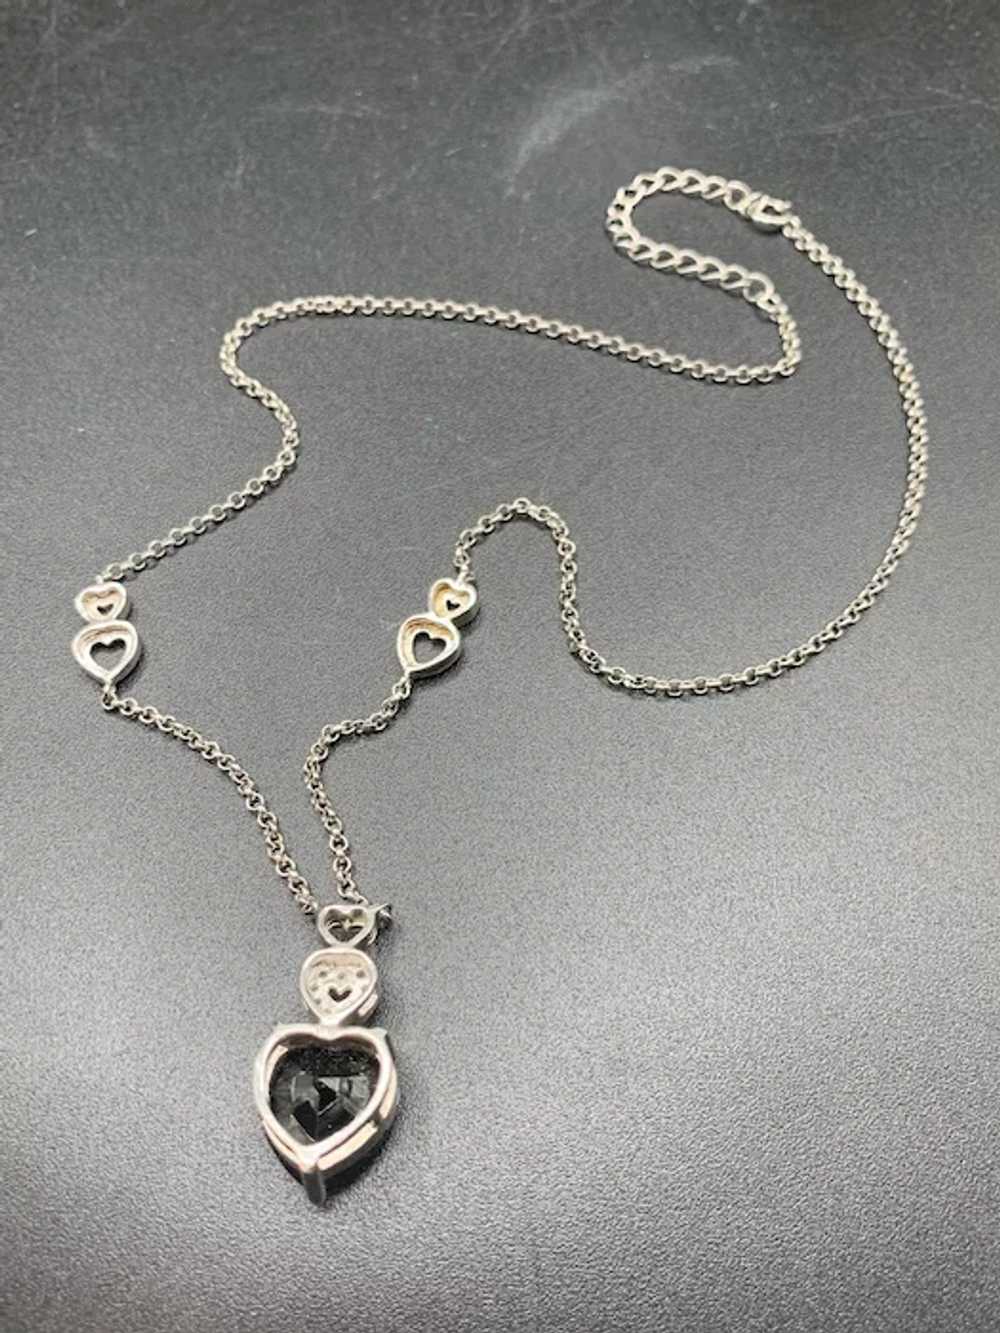 Hematite Heart Necklace Sterling Silver Chain Fac… - image 4